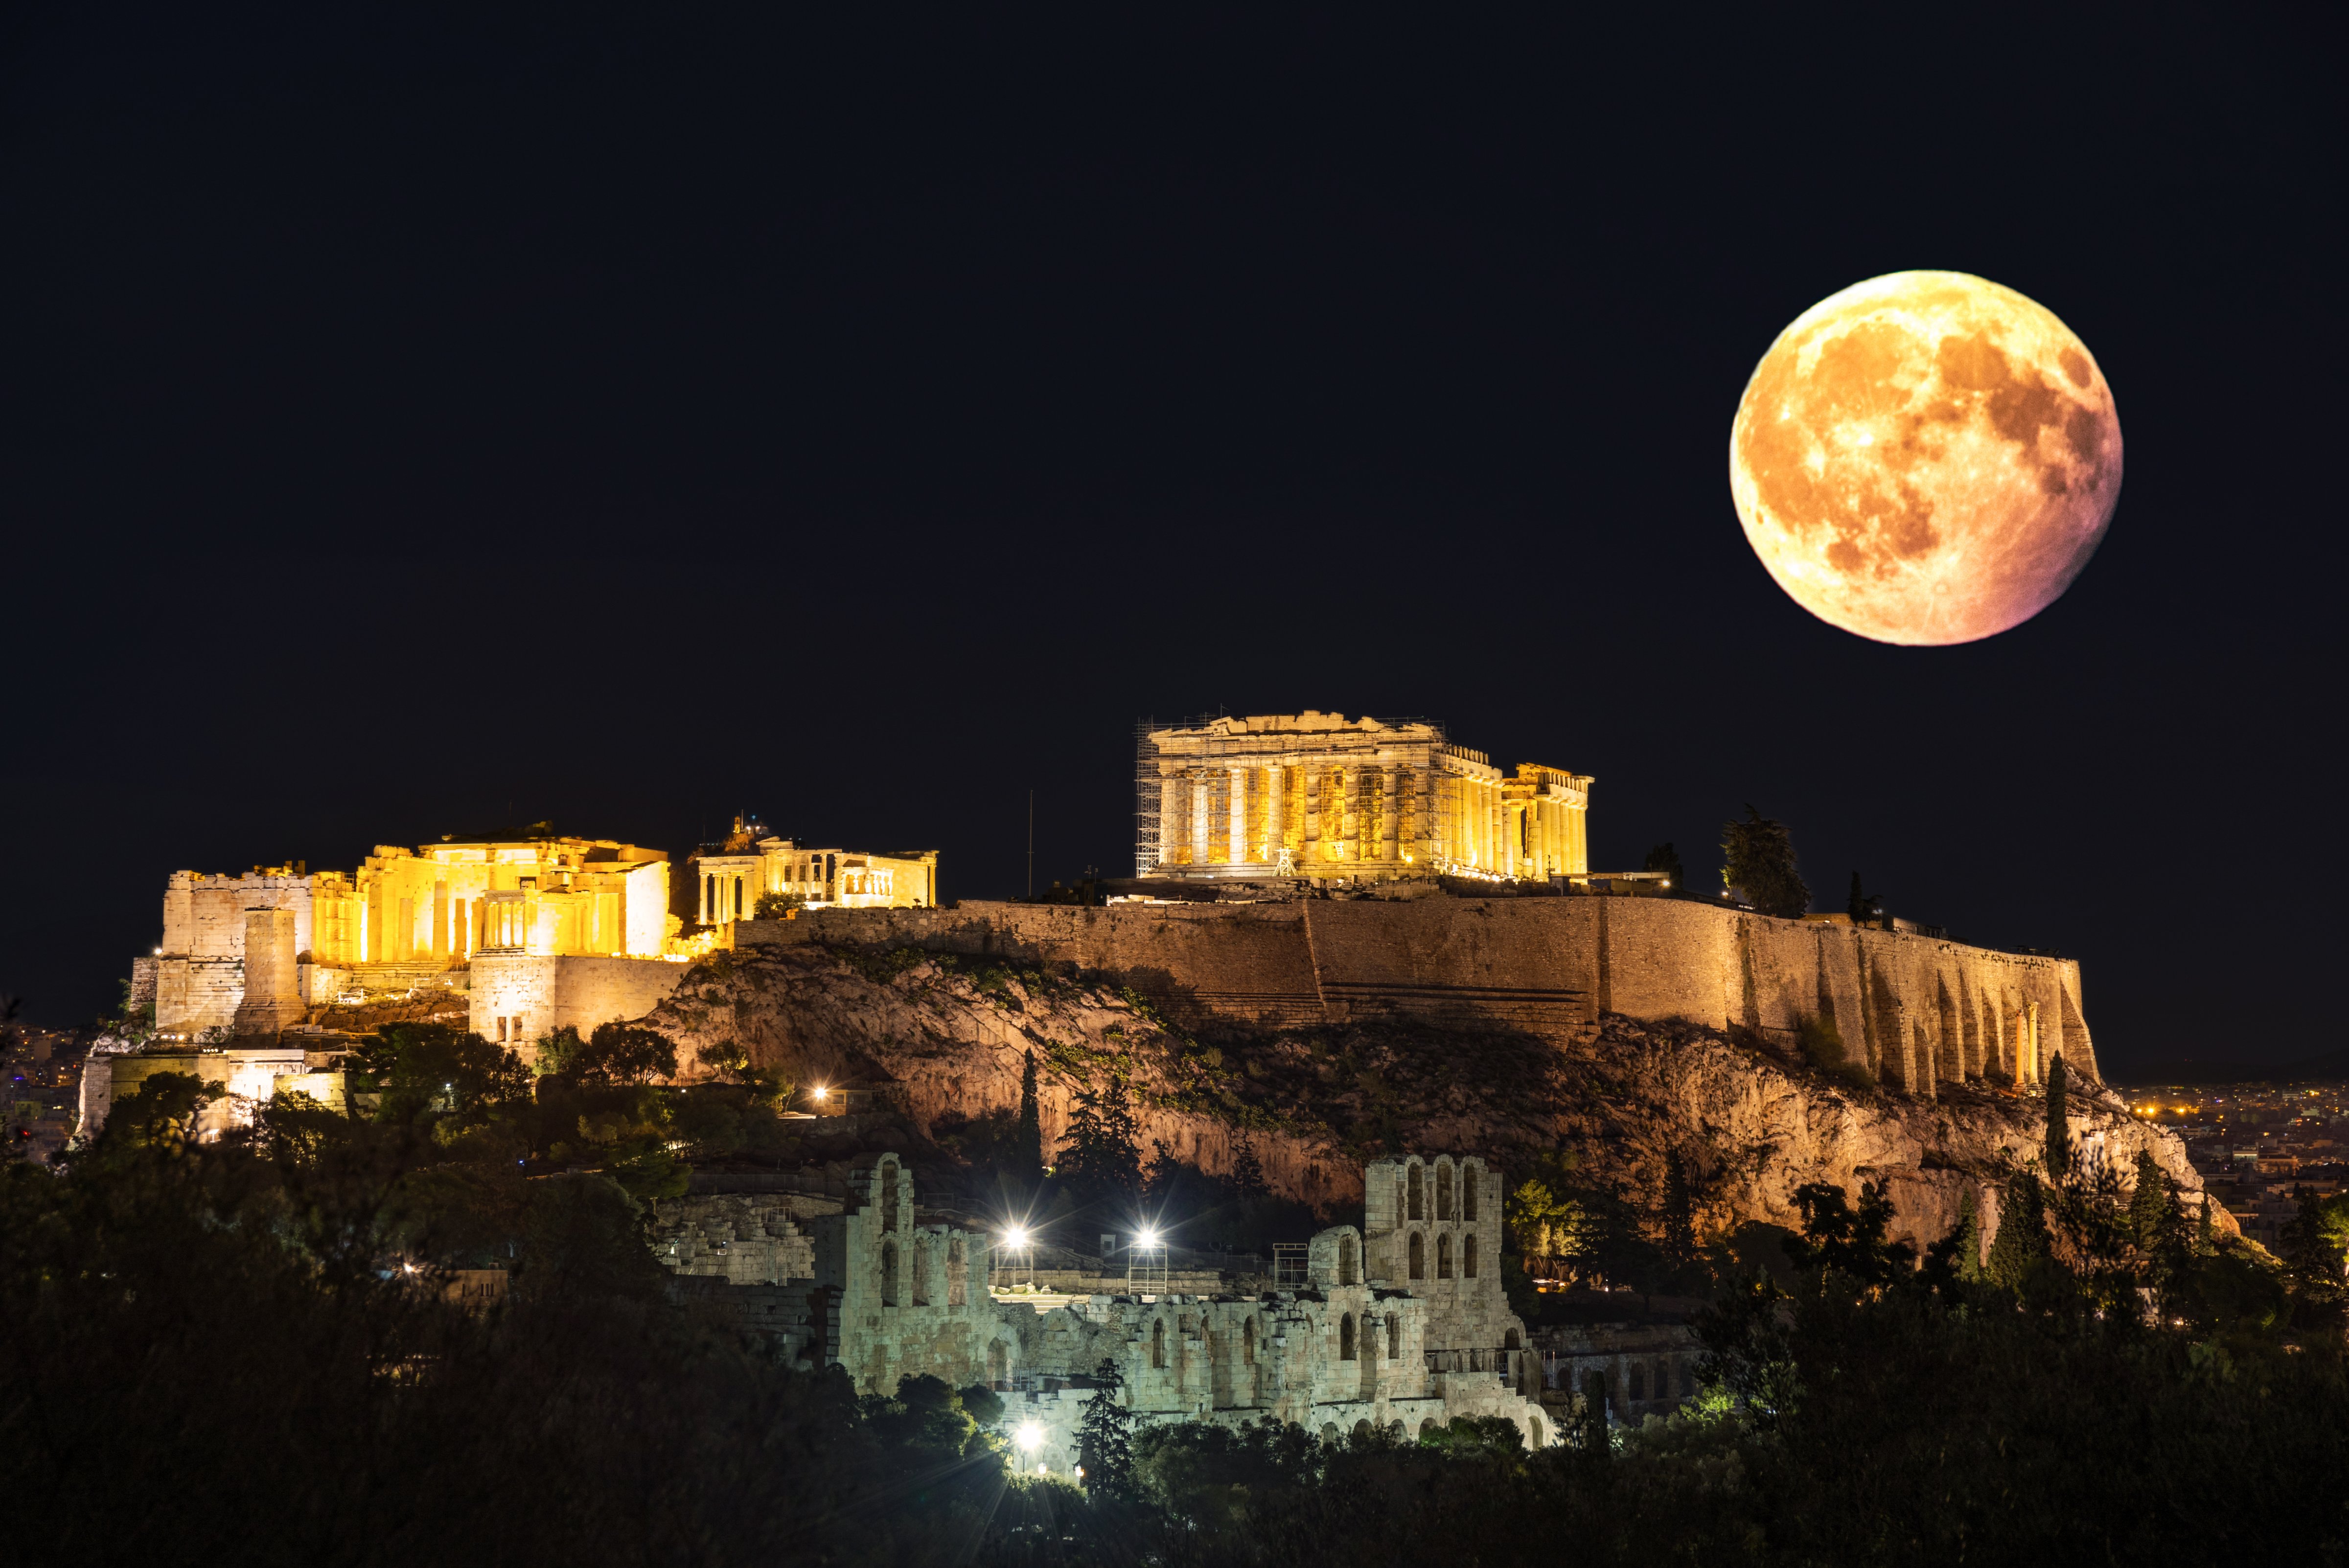 A 2018 supermoon rises above the Acropolis in Athens, Greece. (Getty Images)